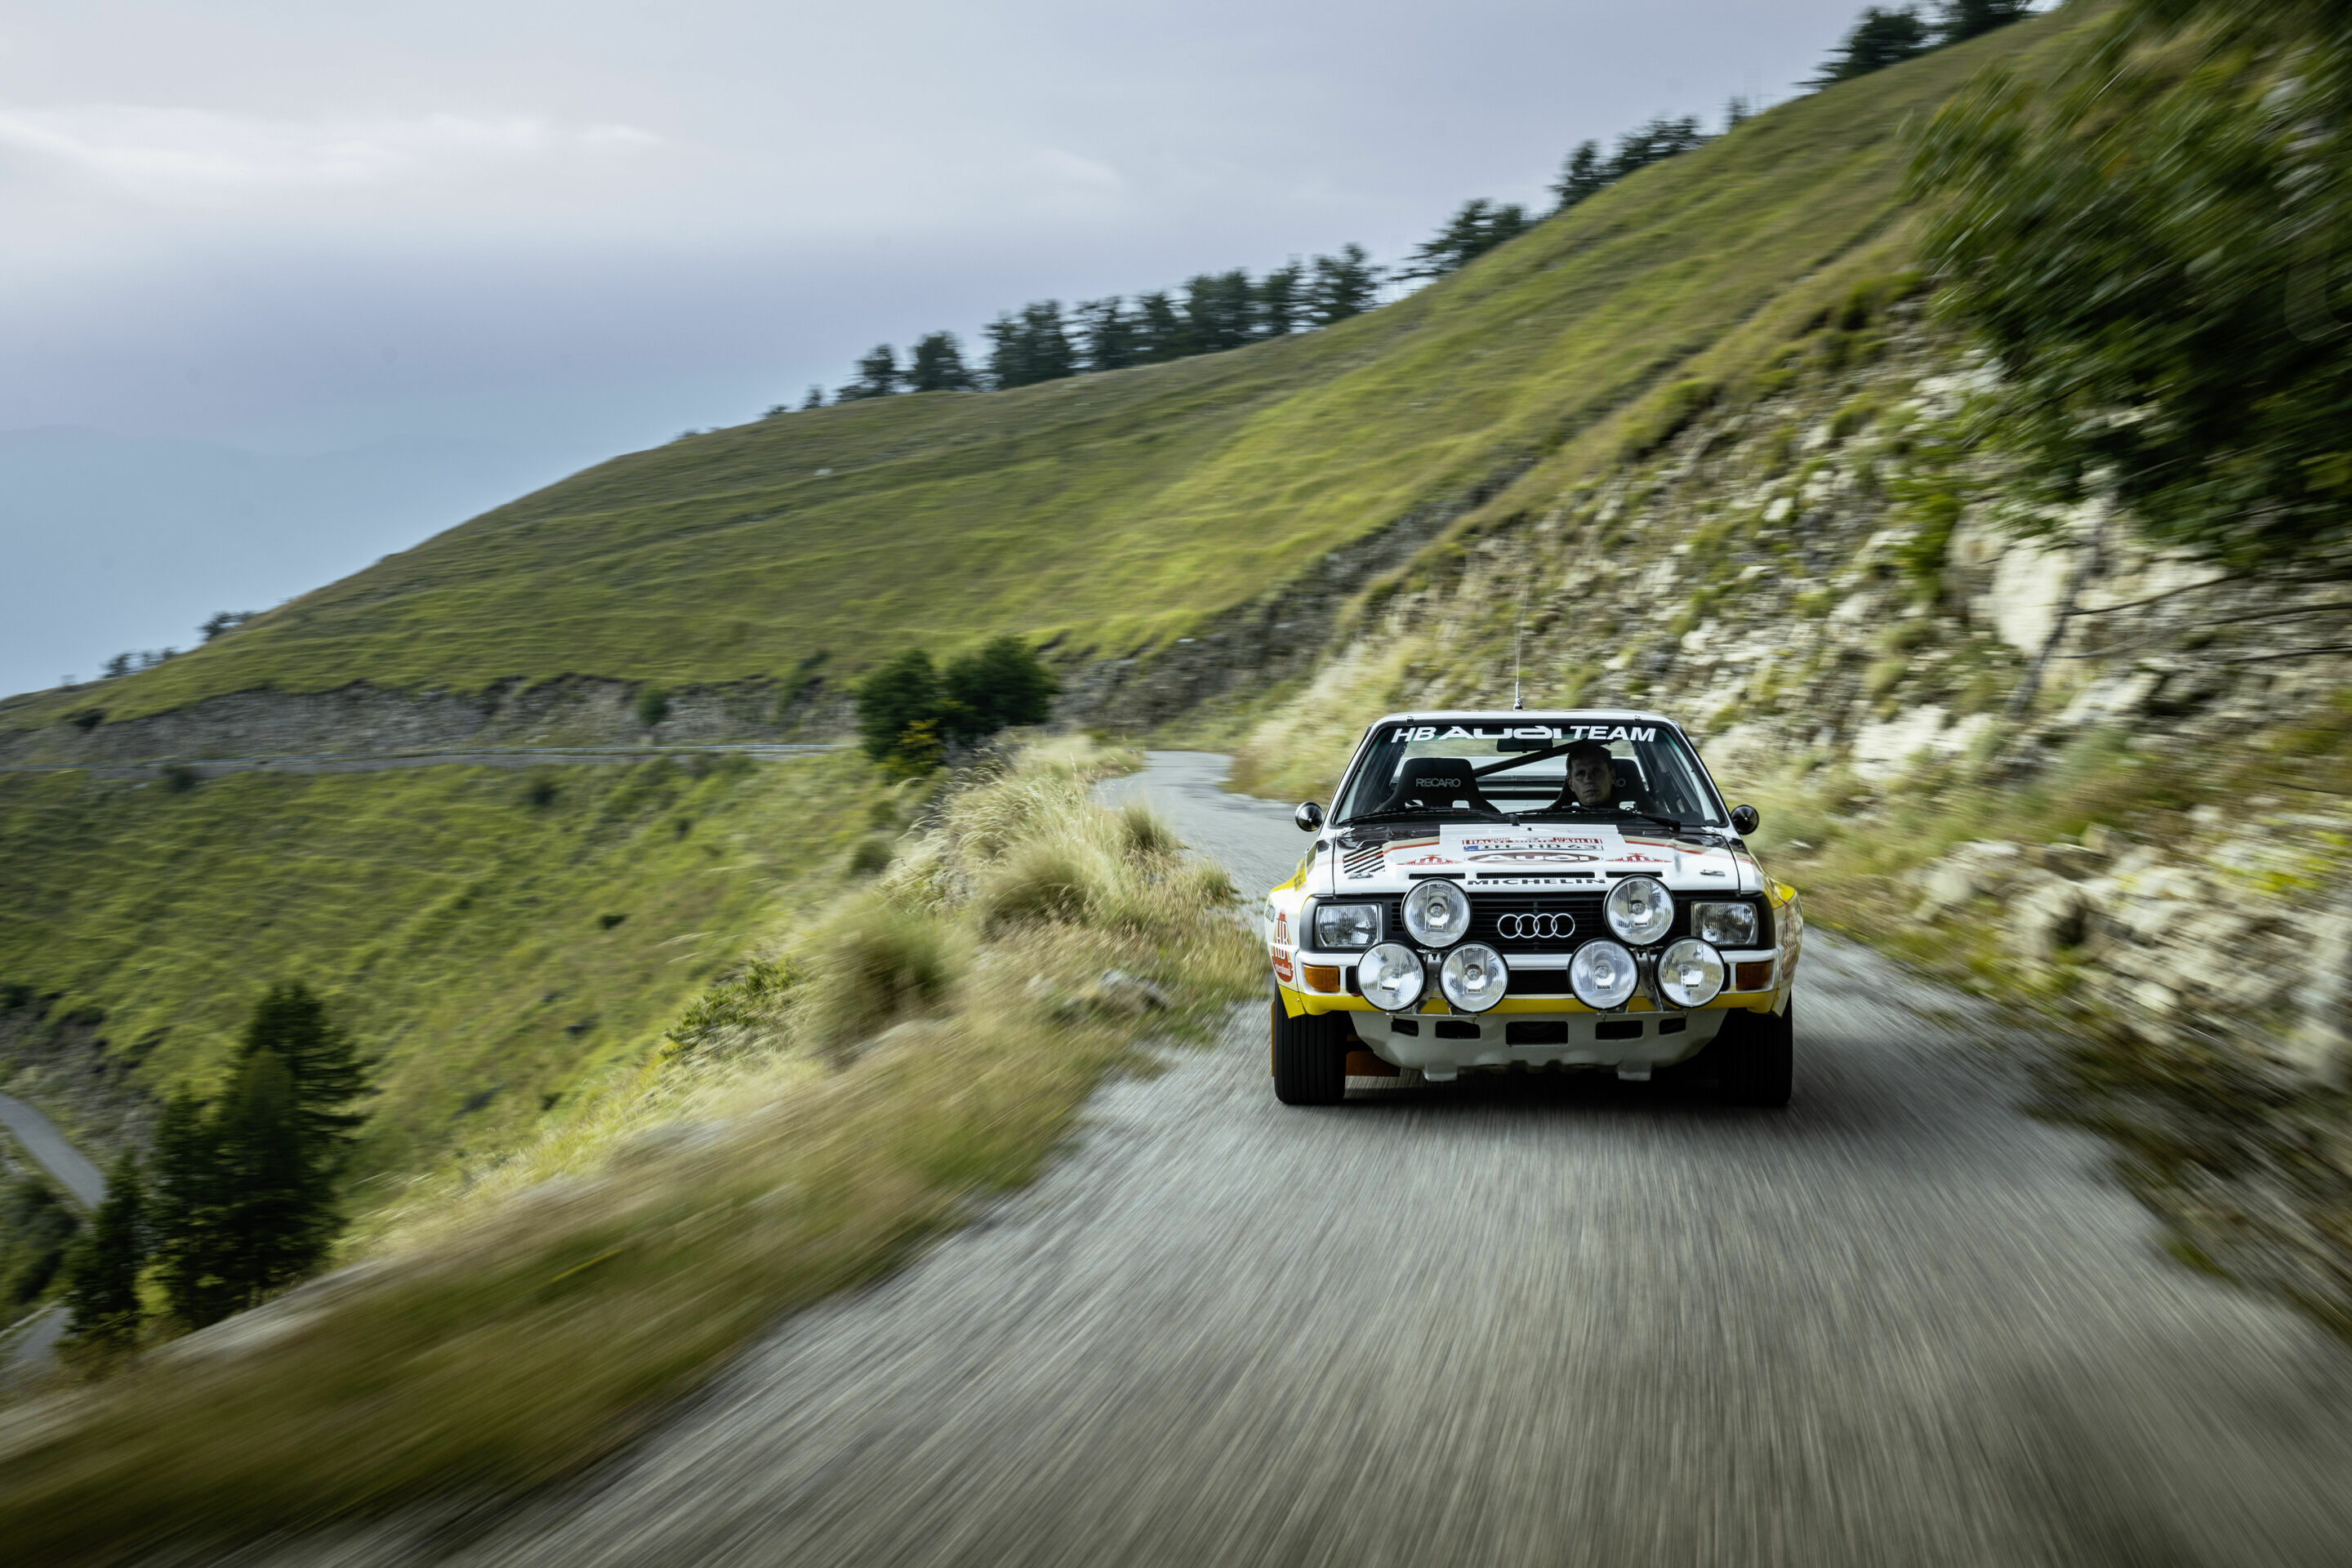 Rally world champion Stig Blomqvist: “The RS e-tron GT gives off a quattro feeling through and through“